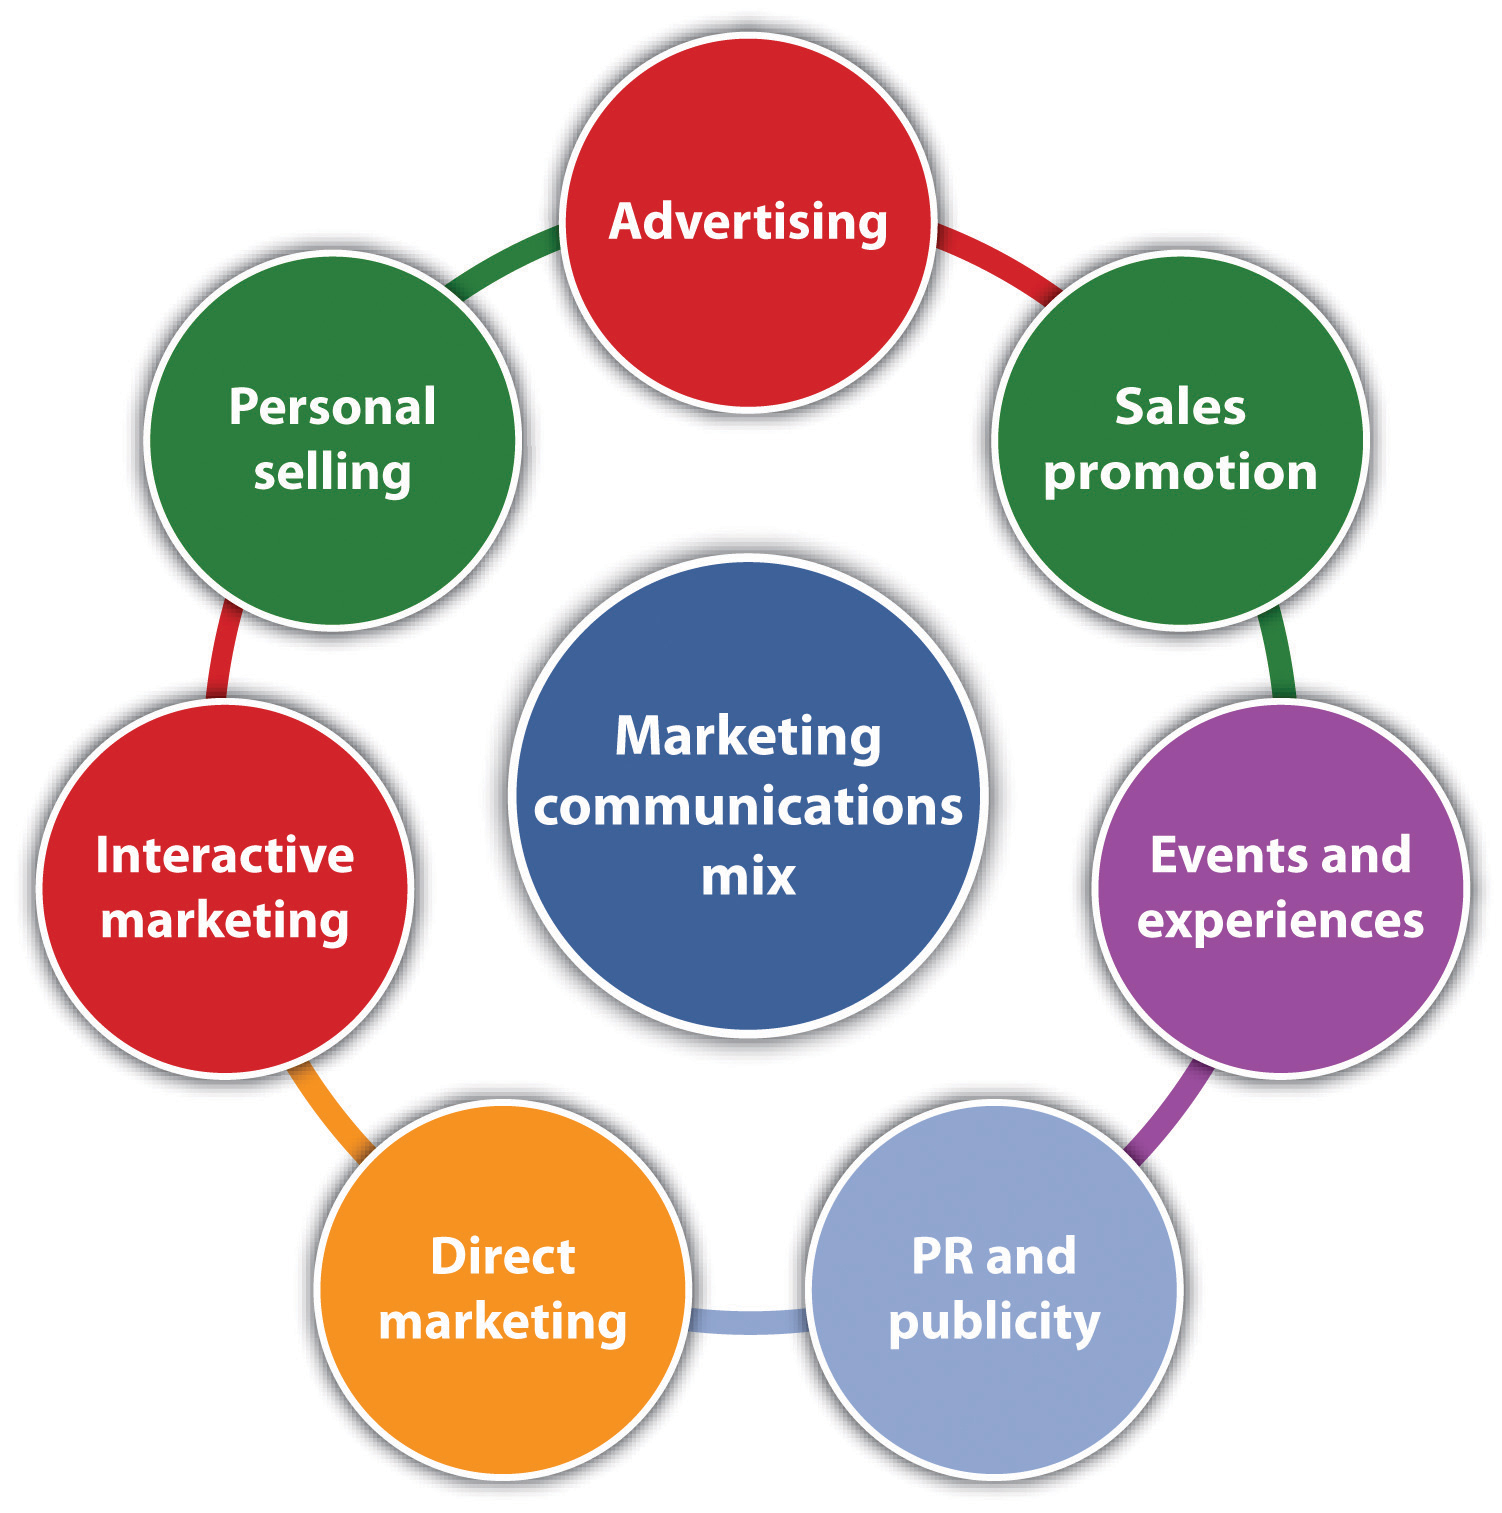 what is advertising in marketing mix